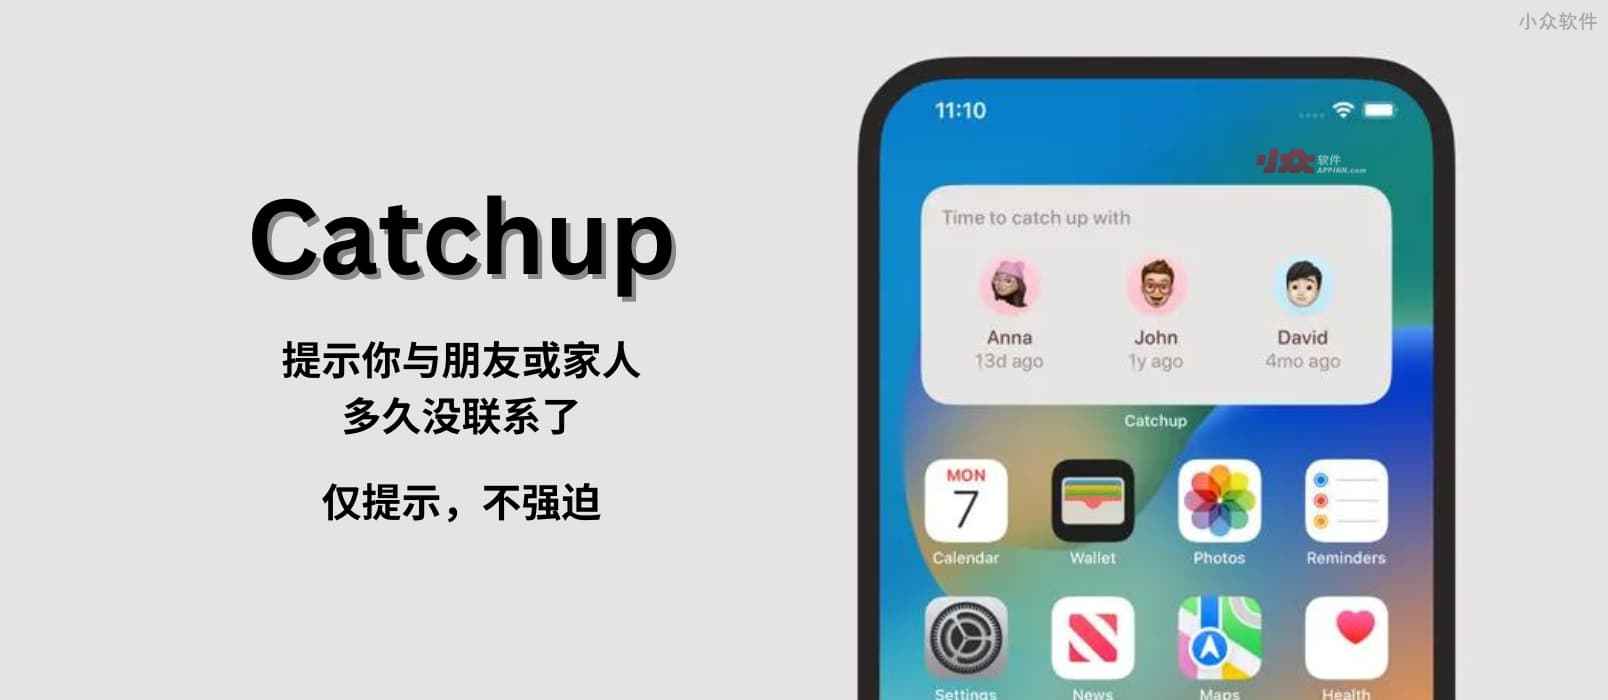 Catchup - 无压力、不强迫提示，你与朋友或家人多久没联系了[iPhone/iPad]